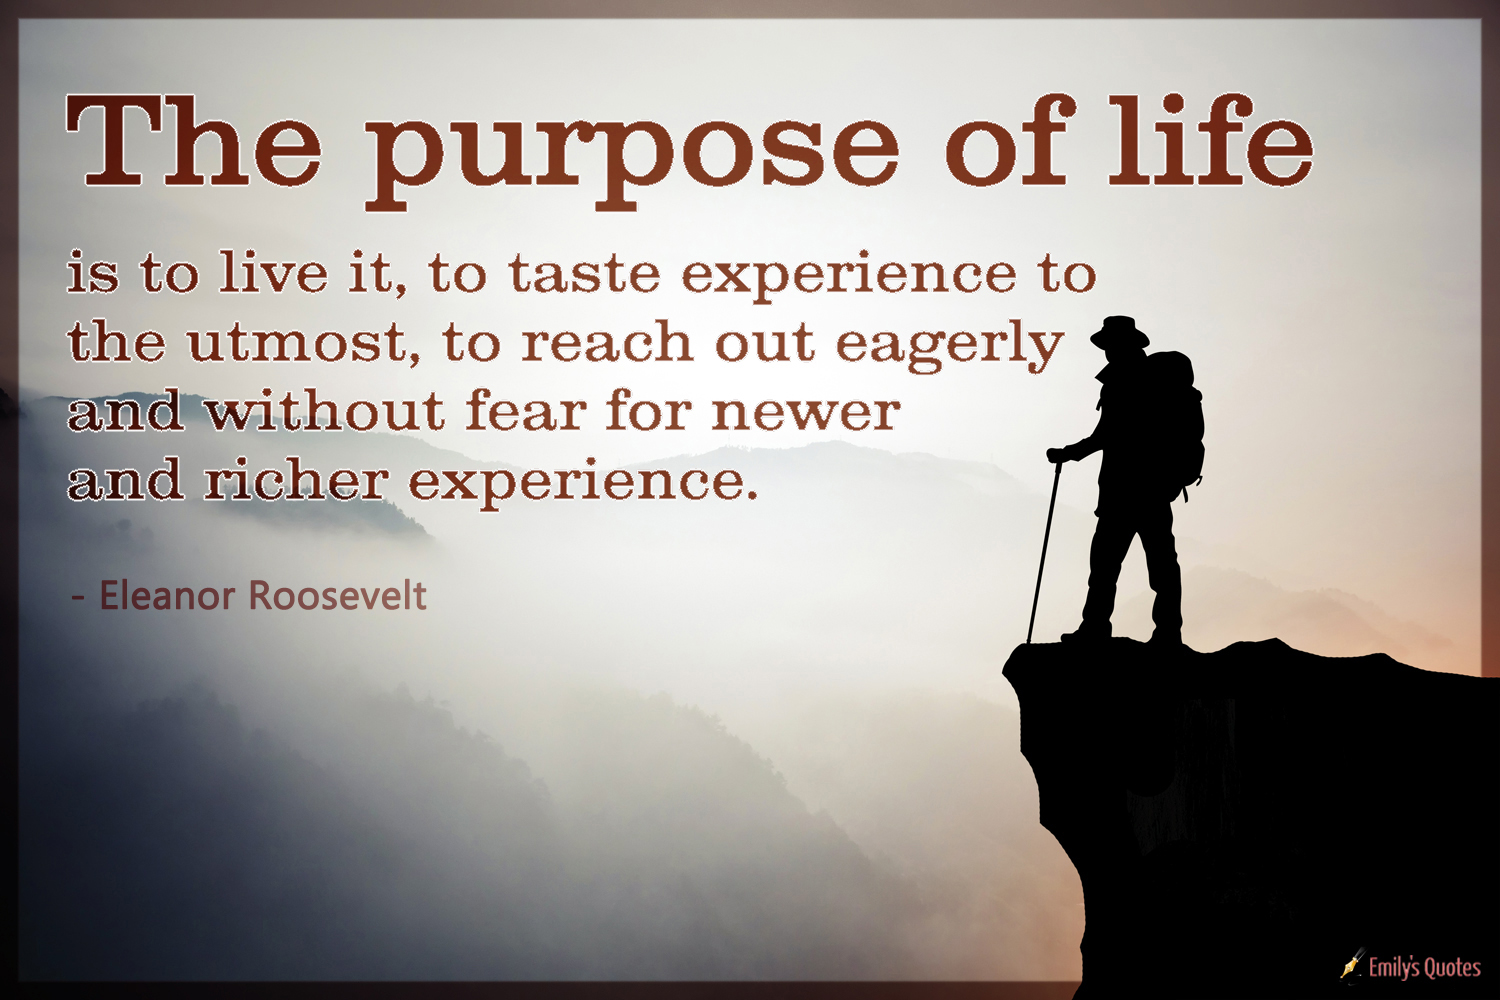 The purpose of life is to live it, to taste experience to the utmost, to reach out eagerly